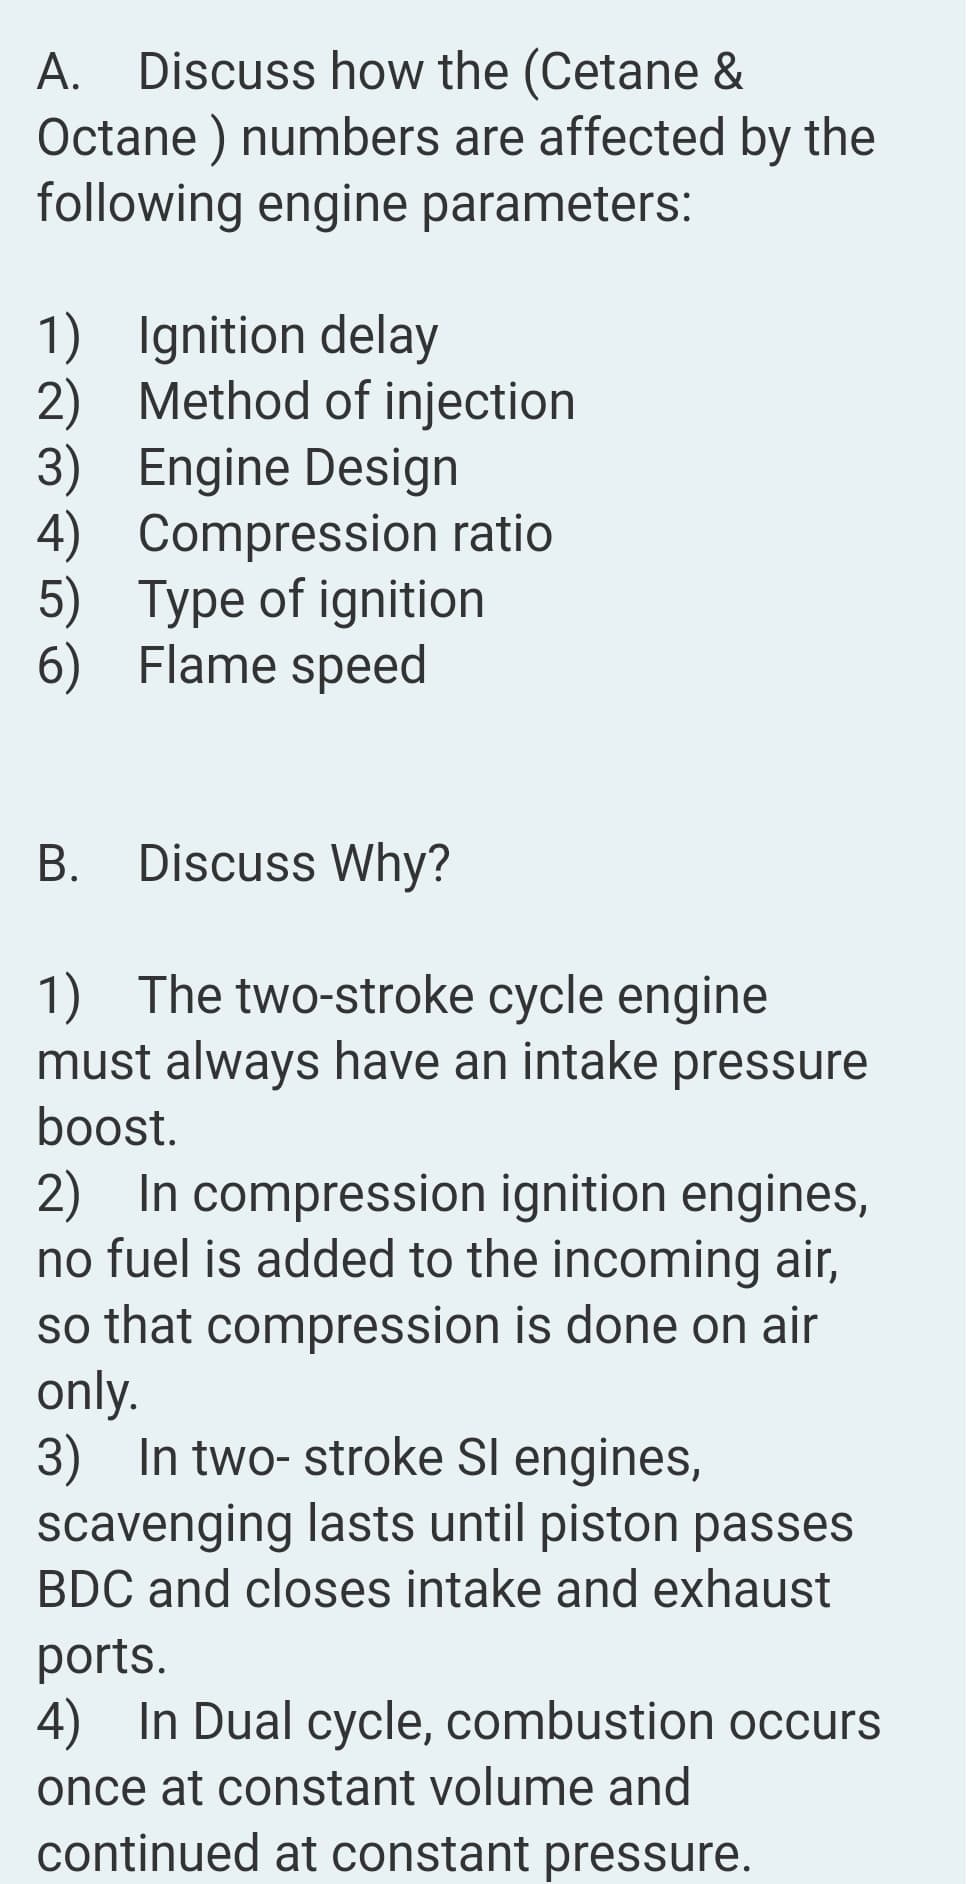 A. Discuss how the (Cetane &
Octane ) numbers are affected by the
following engine parameters:
А.
1) Ignition delay
2) Method of injection
3) Engine Design
4) Compression ratio
5) Type of ignition
6) Flame speed
В.
Discuss Why?
1) The two-stroke cycle engine
must always have an intake pressure
boost.
2) In compression ignition engines,
no fuel is added to the incoming air,
so that compression is done on air
only.
3) In two- stroke SI engines,
scavenging lasts until piston passes
BDC and closes intake and exhaust
ports.
4) In Dual cycle, combustion occurs
once at constant volume and
continued at constant pressure.
